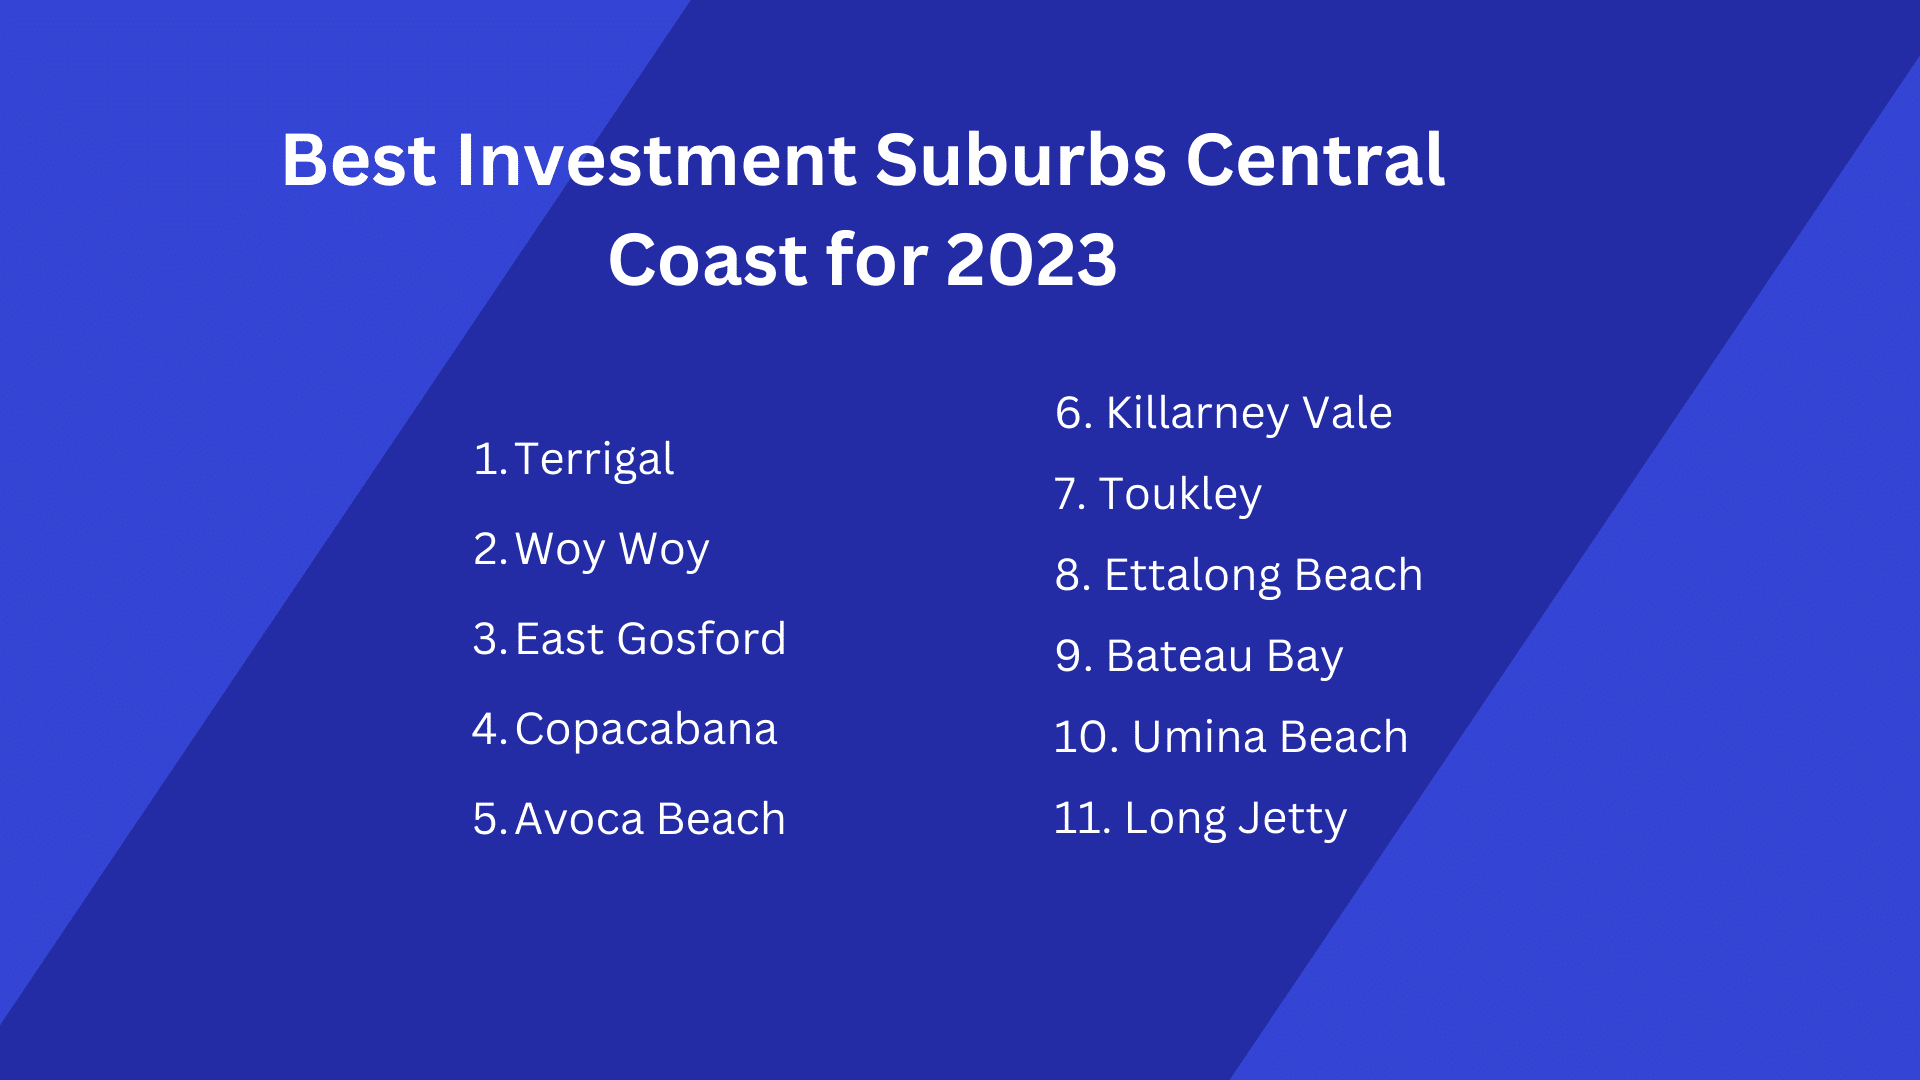 list of the best investment suburbs in the central coast